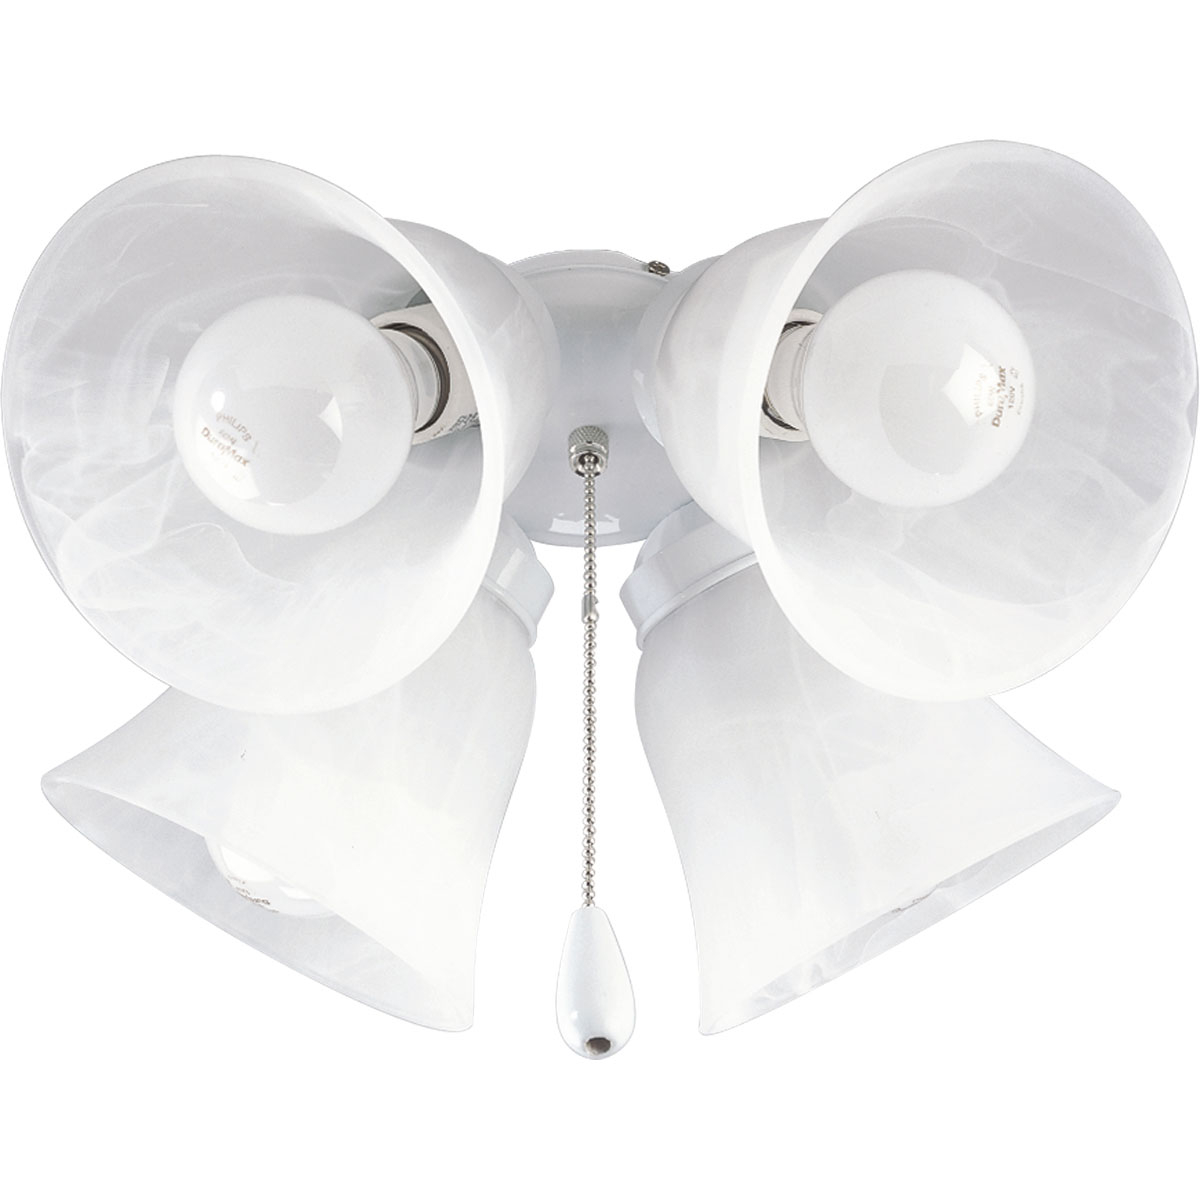 Four-light kit with white washed alabaster style glass shades beautiful in design. White finish corresponds with a Chrome pull-chain and white fob. Innovative spring clip glass attachment system eliminates unsightly excess hardware. Good for use with P2500 and P2501 ceiling fans and includes quick connector for easy wiring.